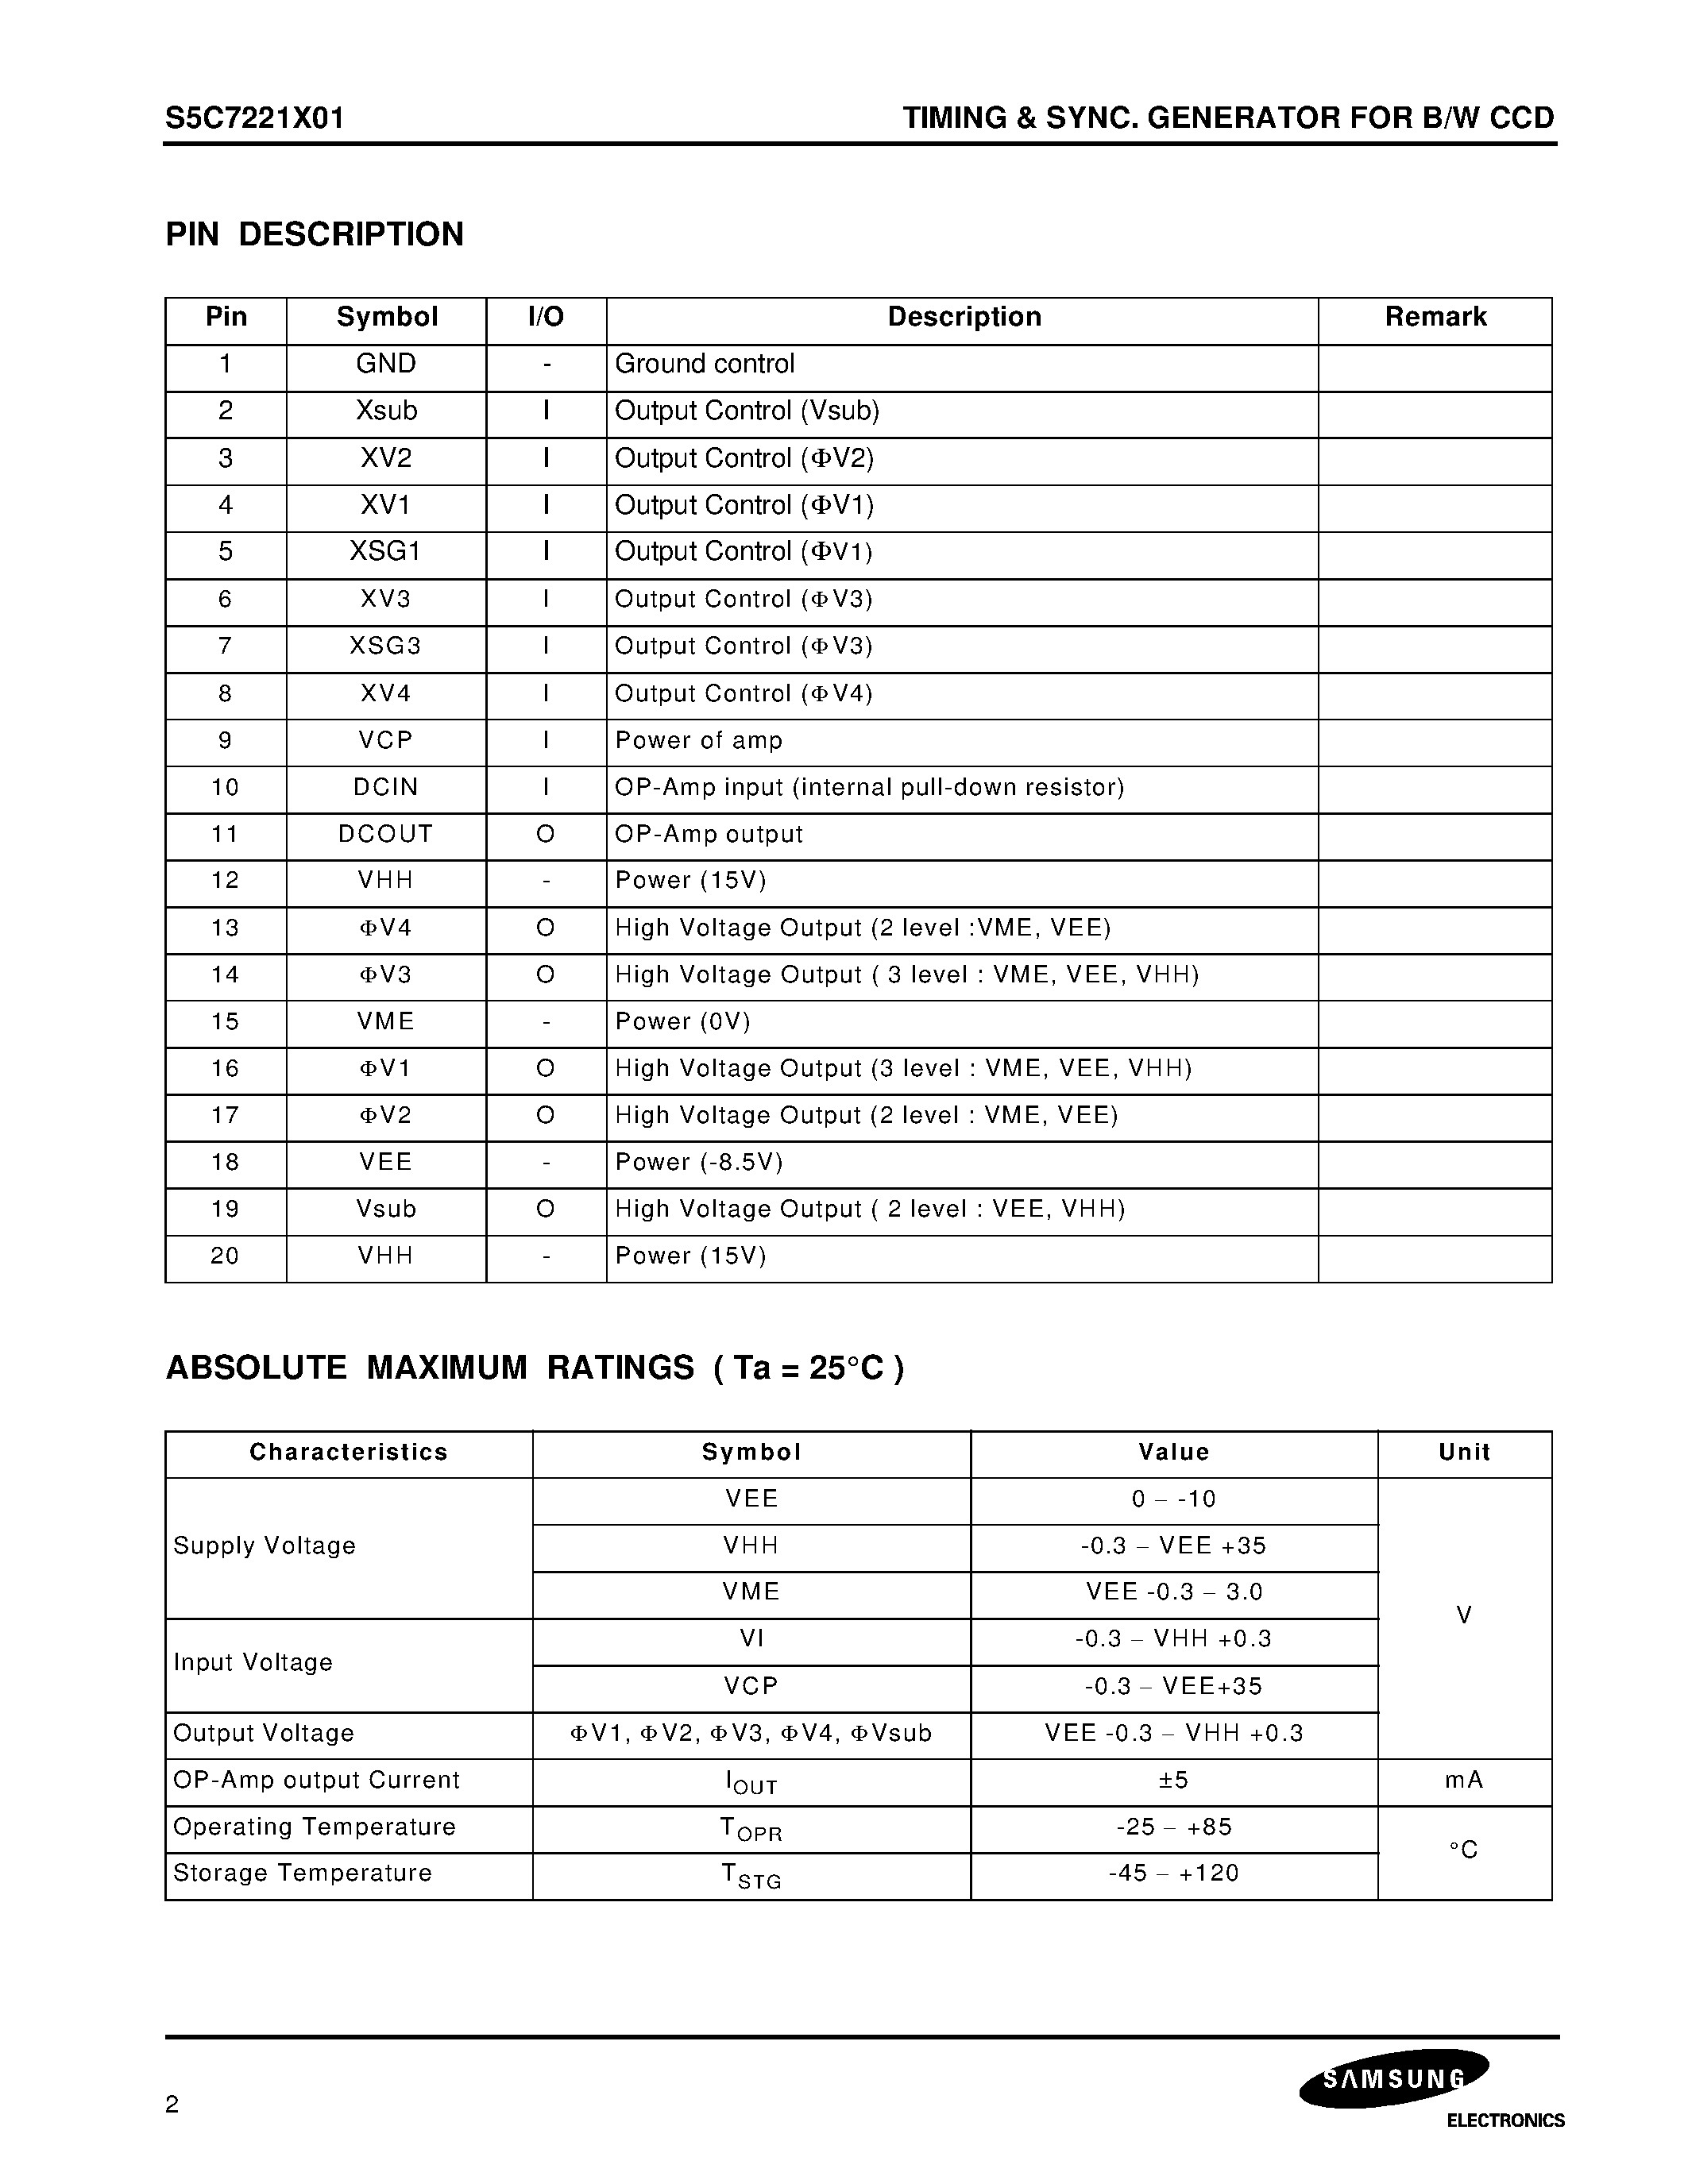 Datasheet S5C7221X01 - TIMING & SYNC. GENERATOR FOR B/W CCD page 2